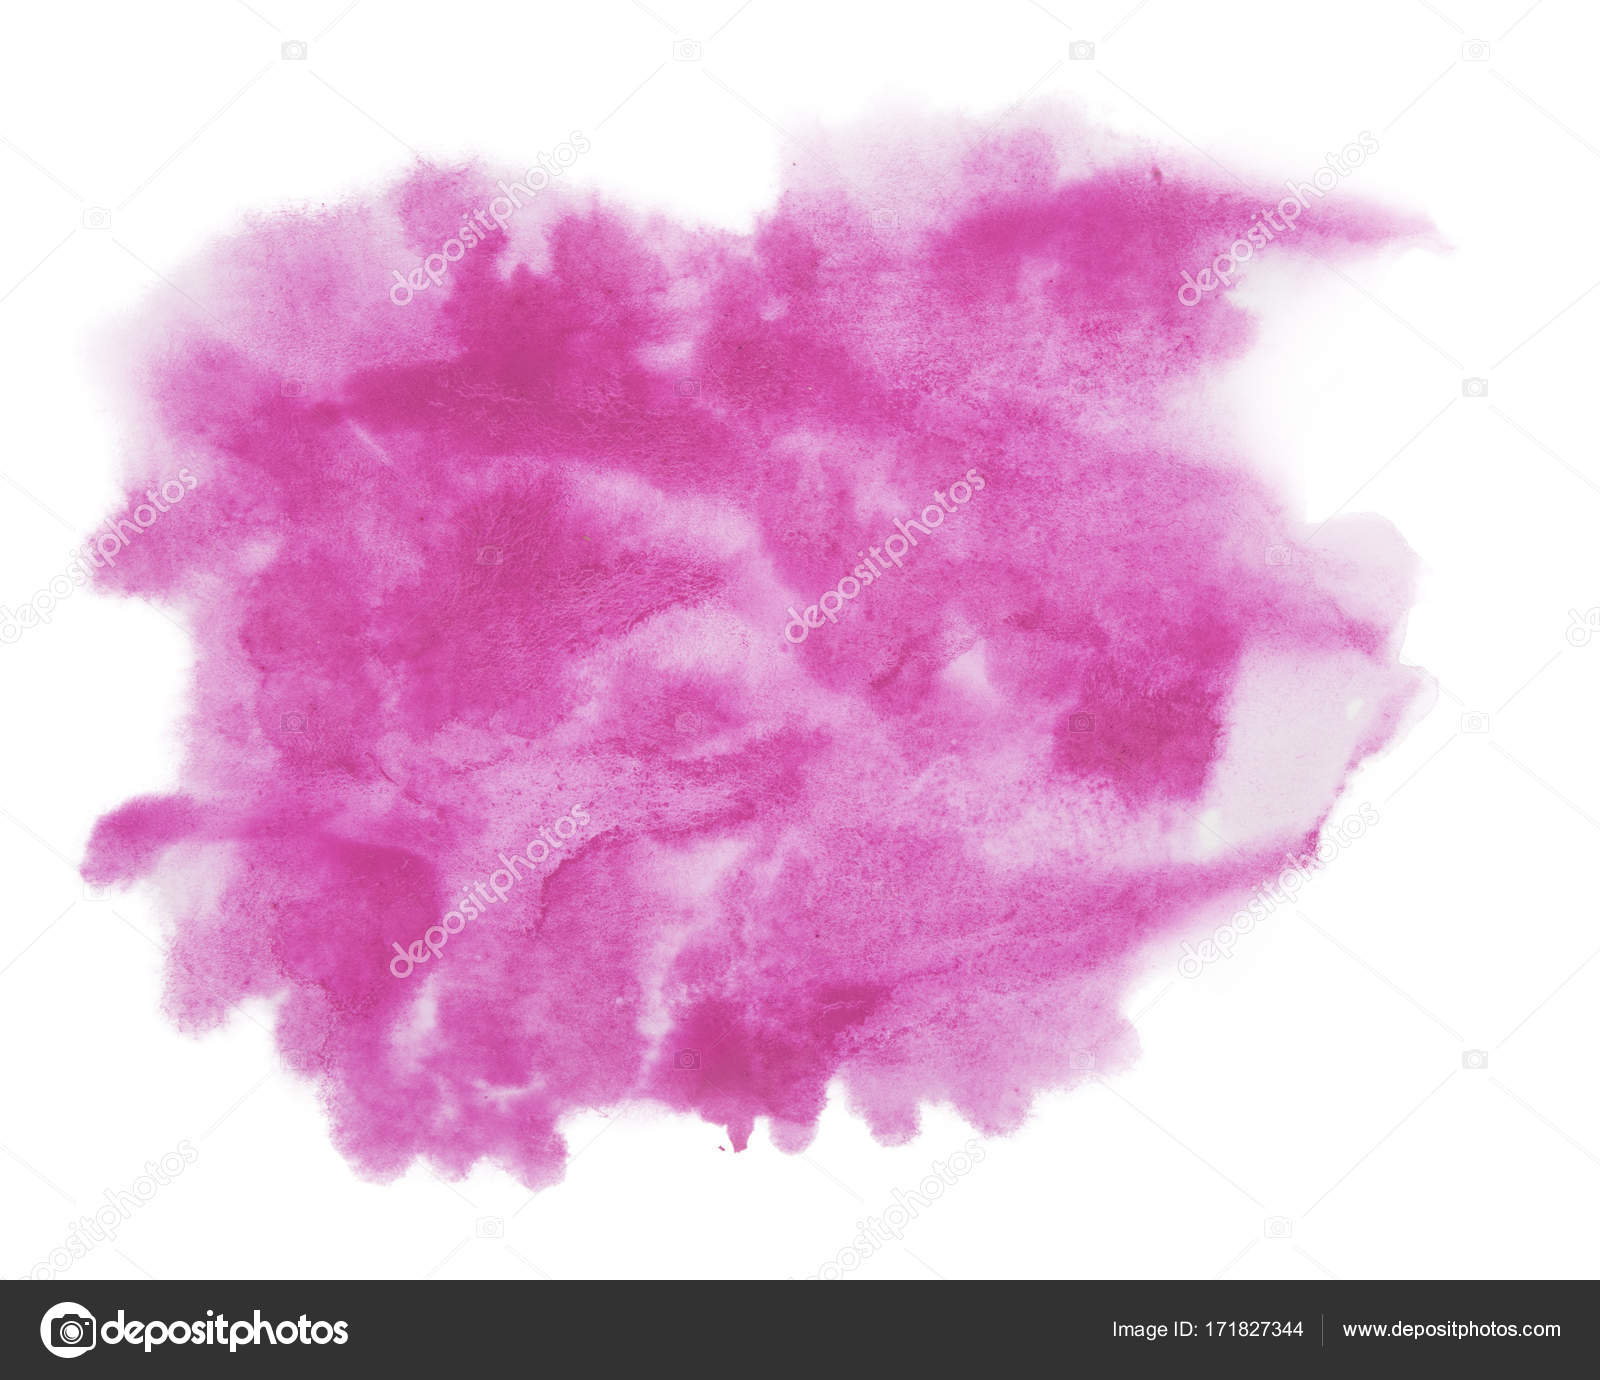 Color, red - pink splash watercolor hand painted isolated on white ...